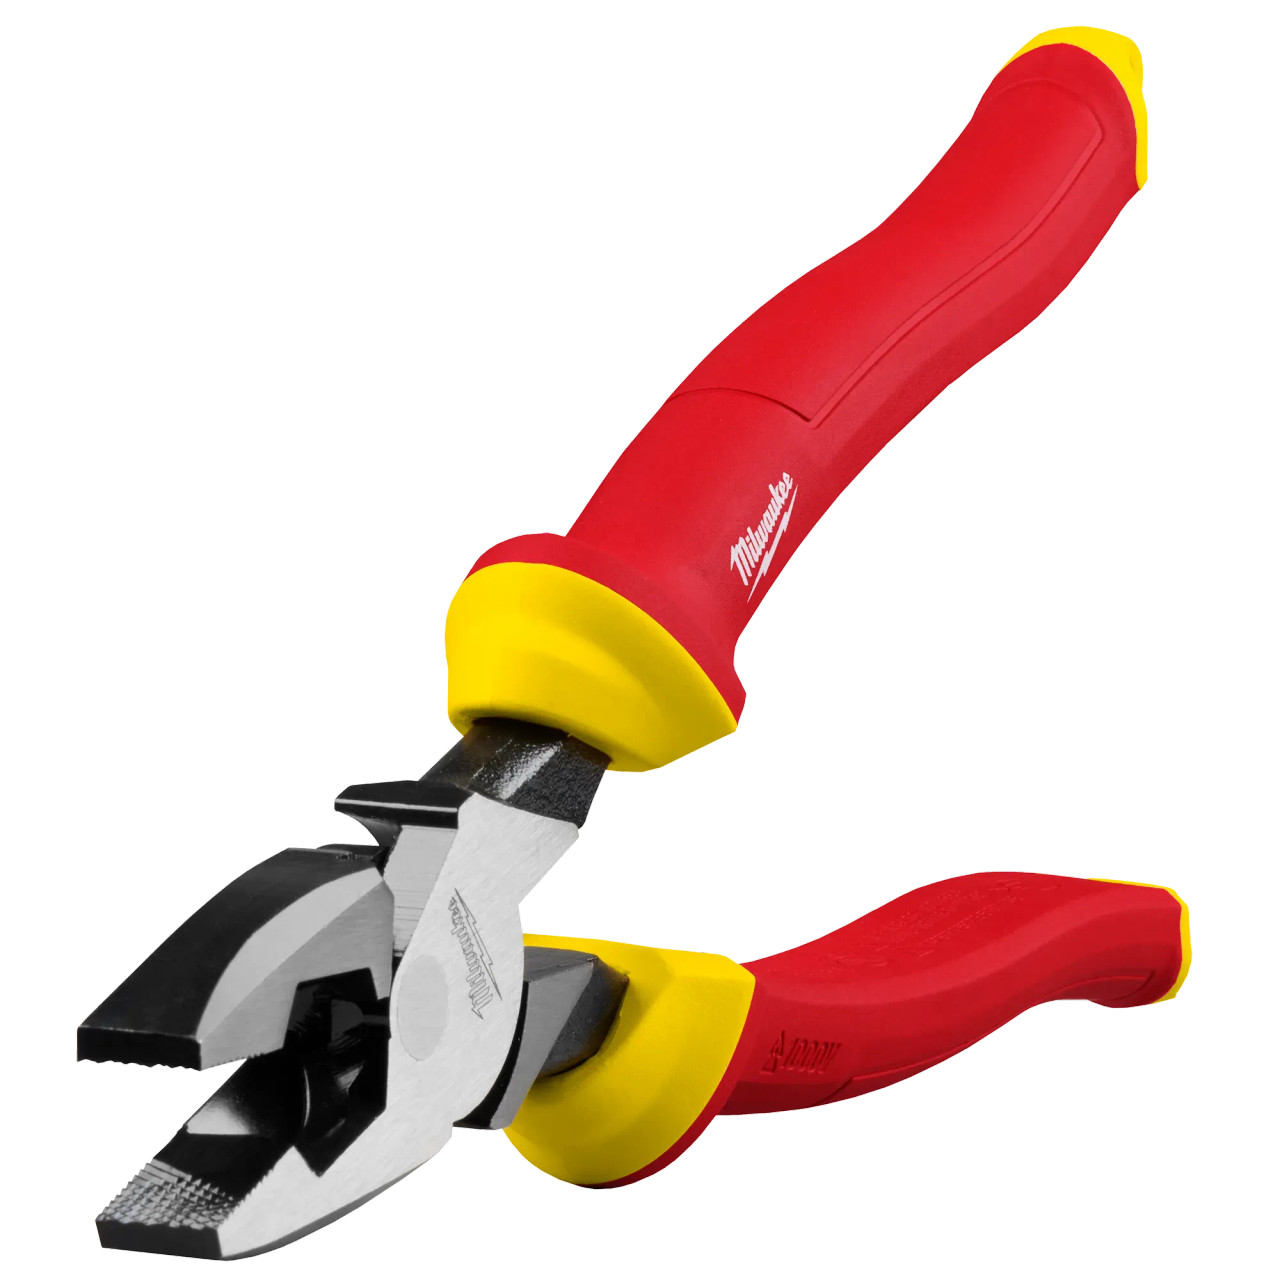 1000V Insulated 9" Lineman's Pliers